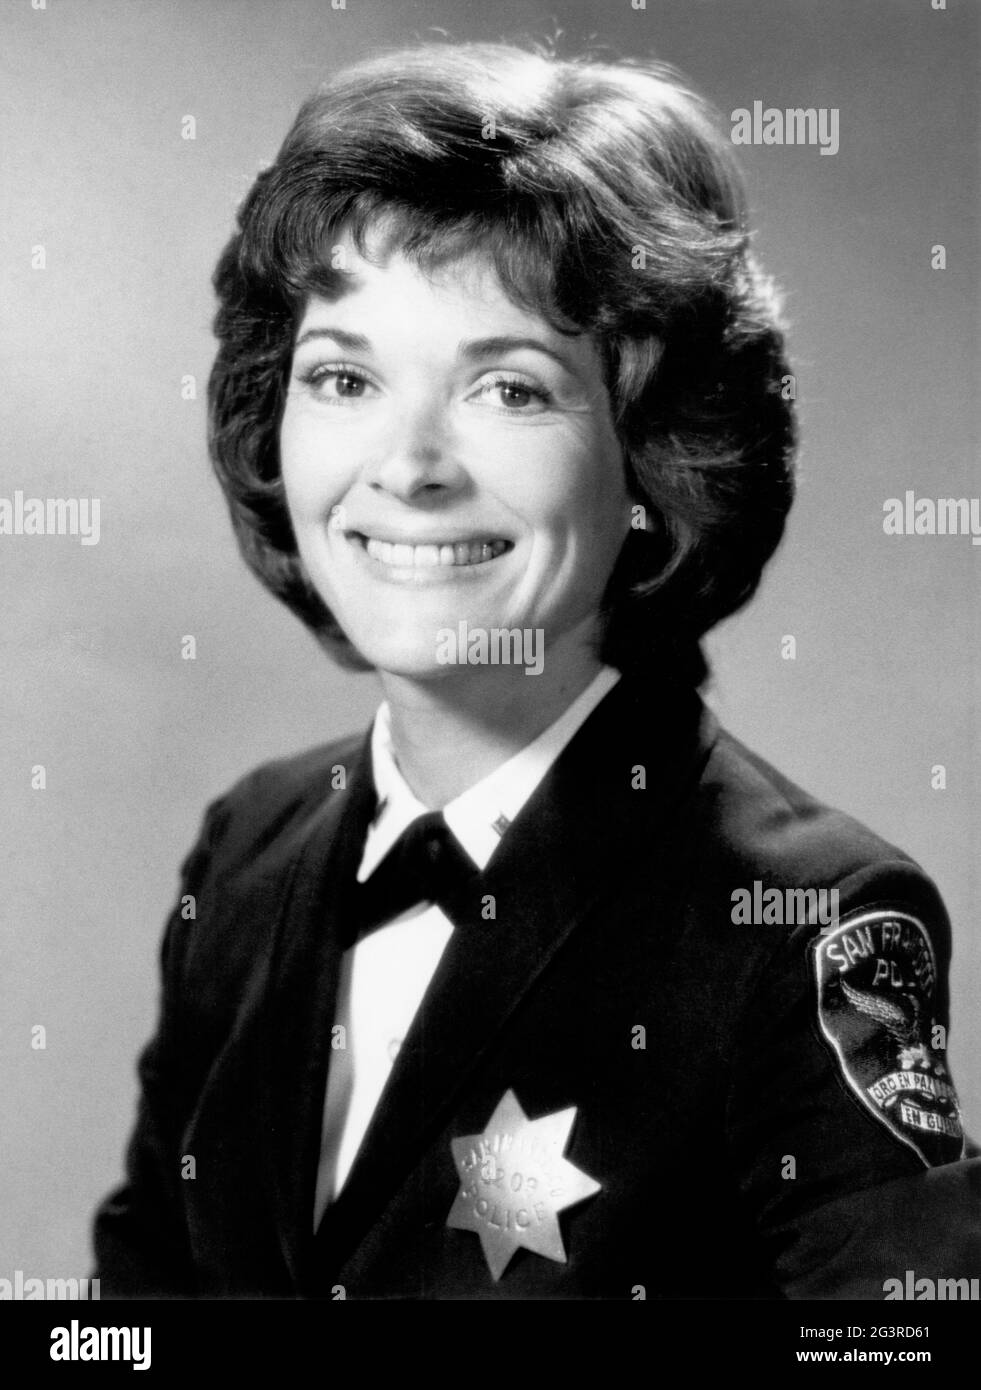 Jessica Walter, Head and Shoulders Publicity Portrait for the TV Series, 'Amy Prentiss', NBC-TV, 1974 Stock Photo